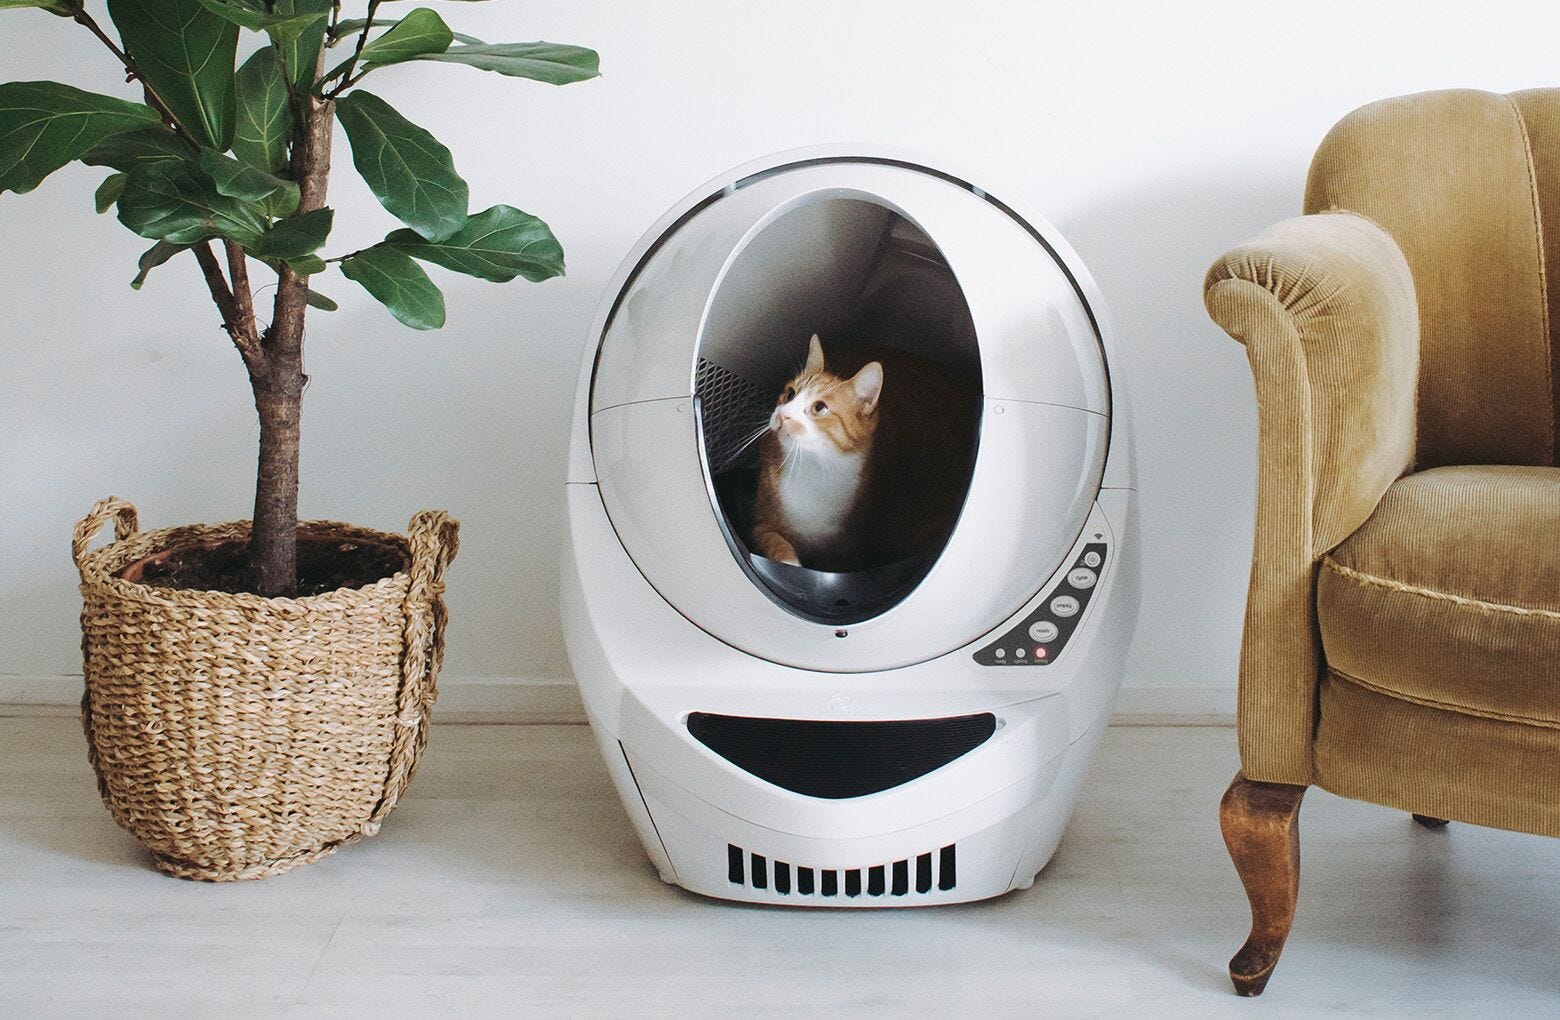 Orange and white cat sitting in the entry of a beige litter robot